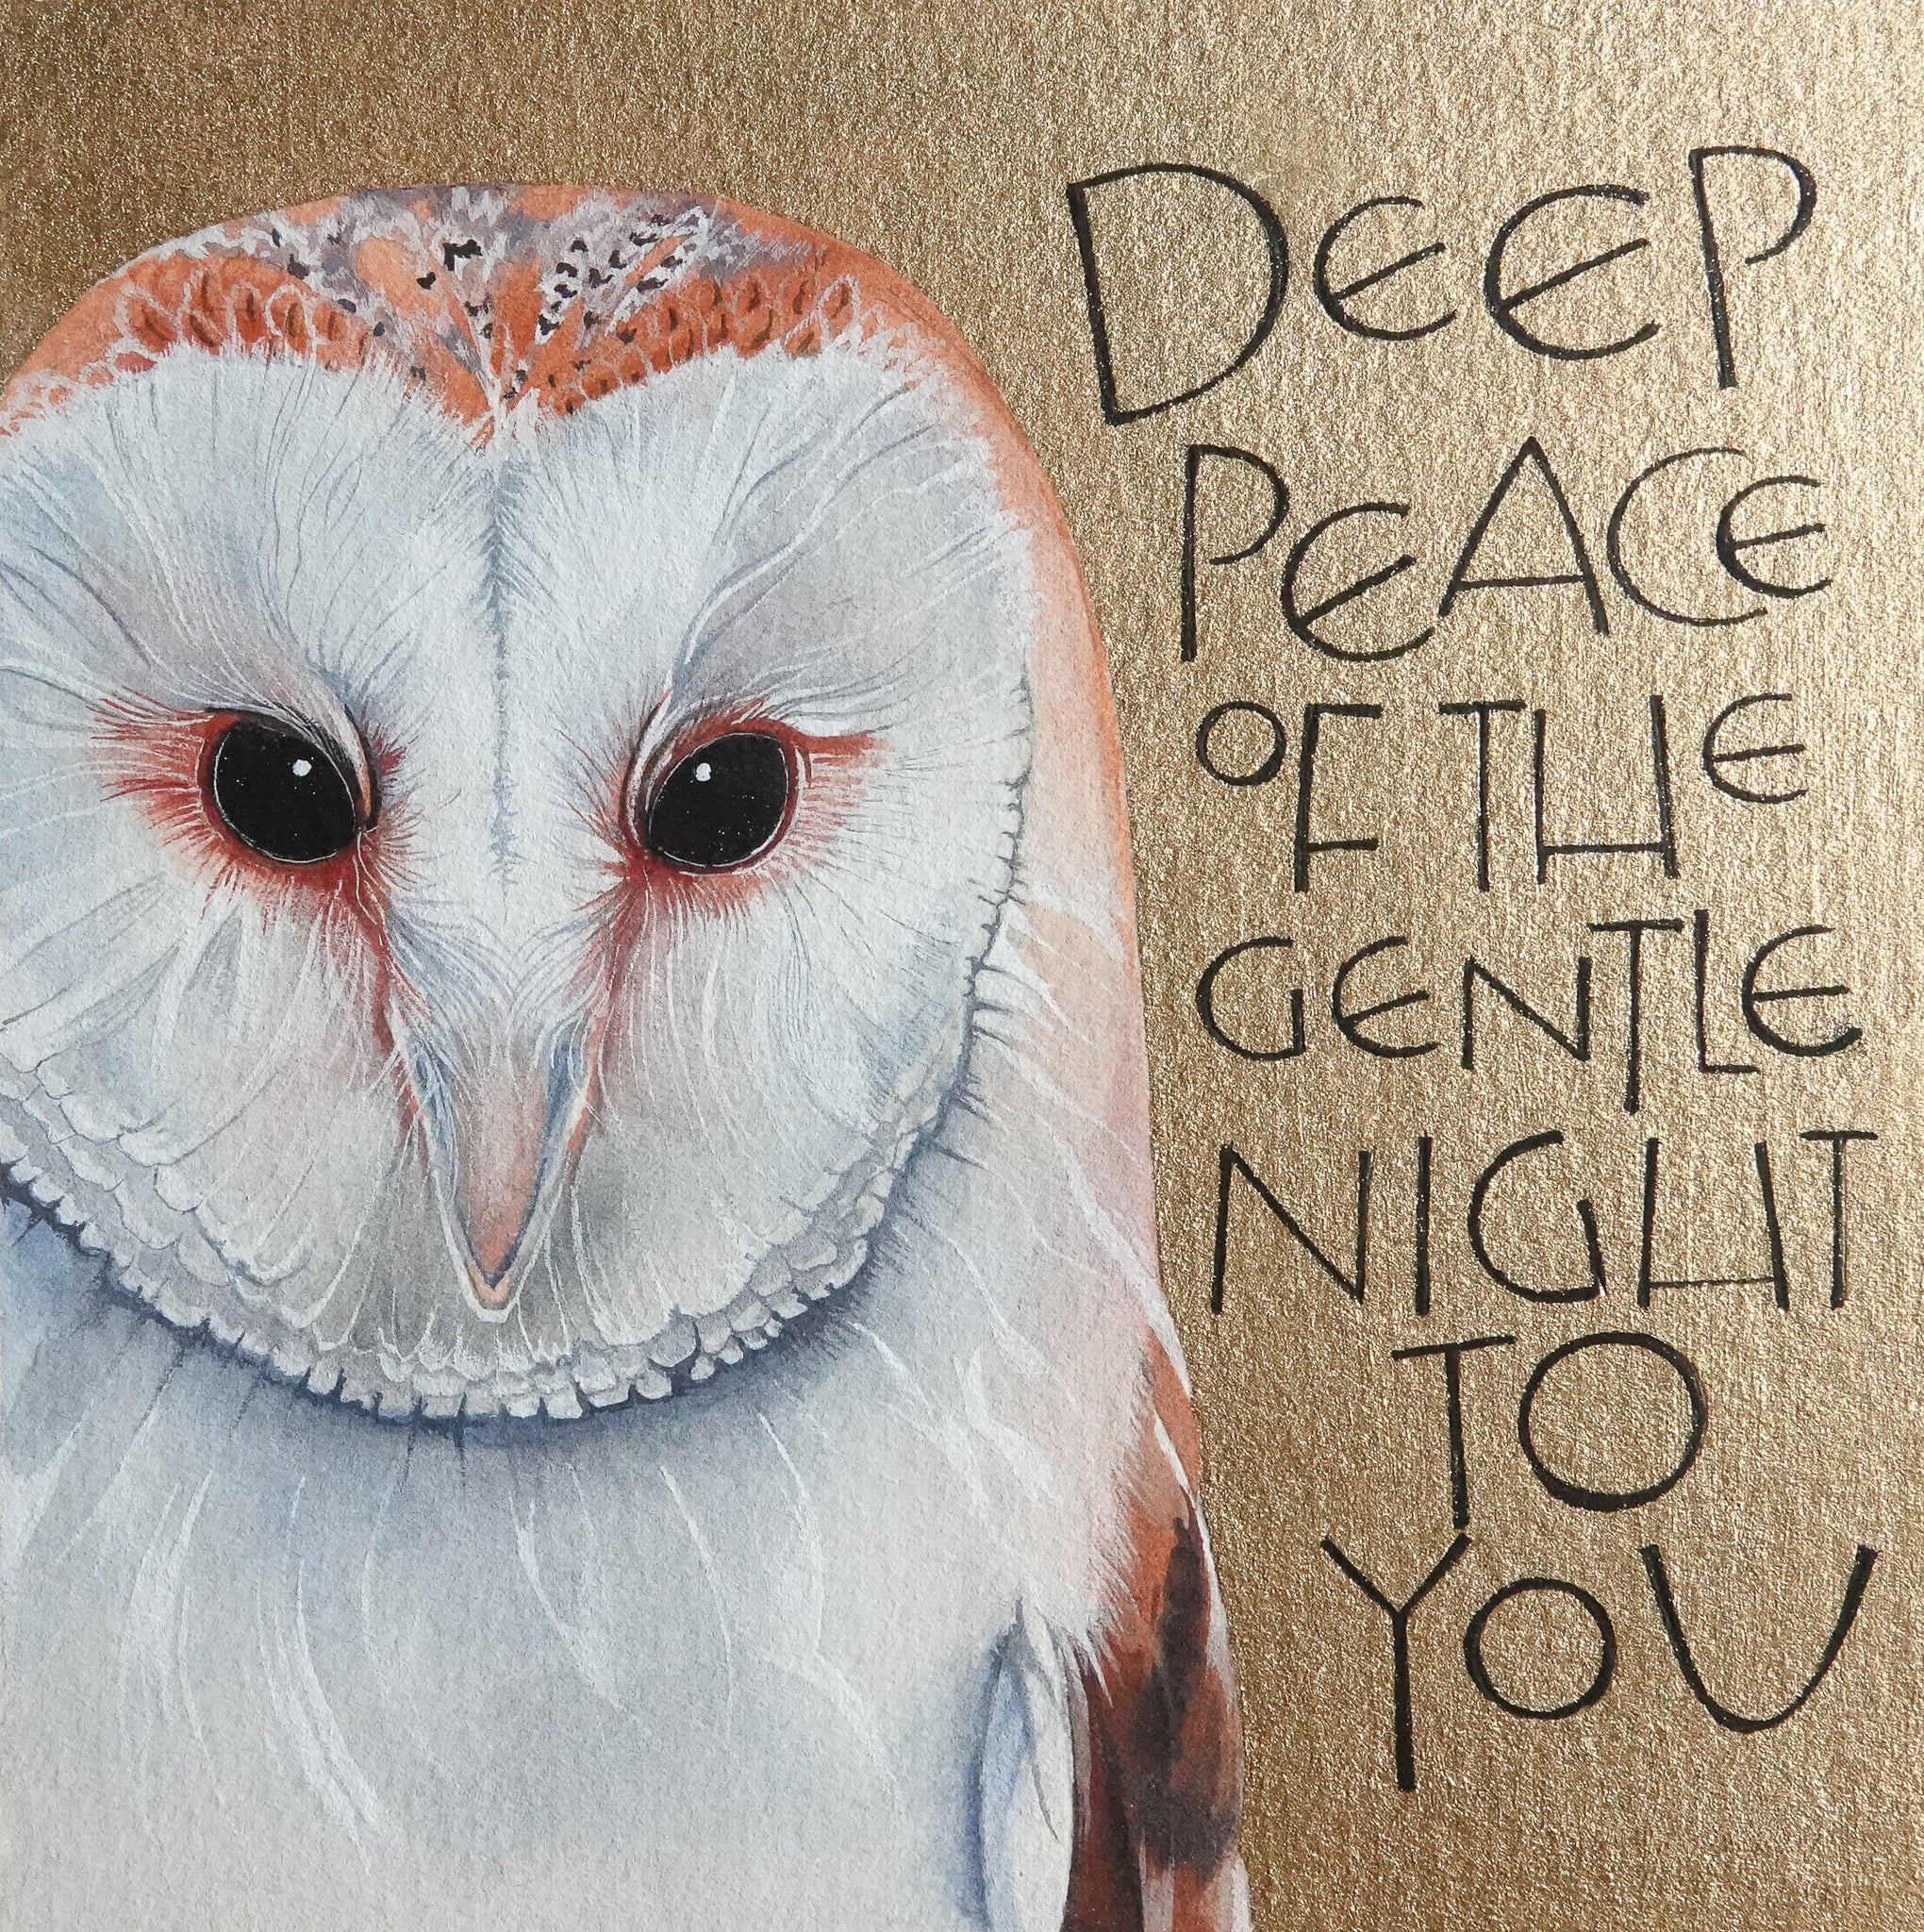 Deep peace of the gentle night